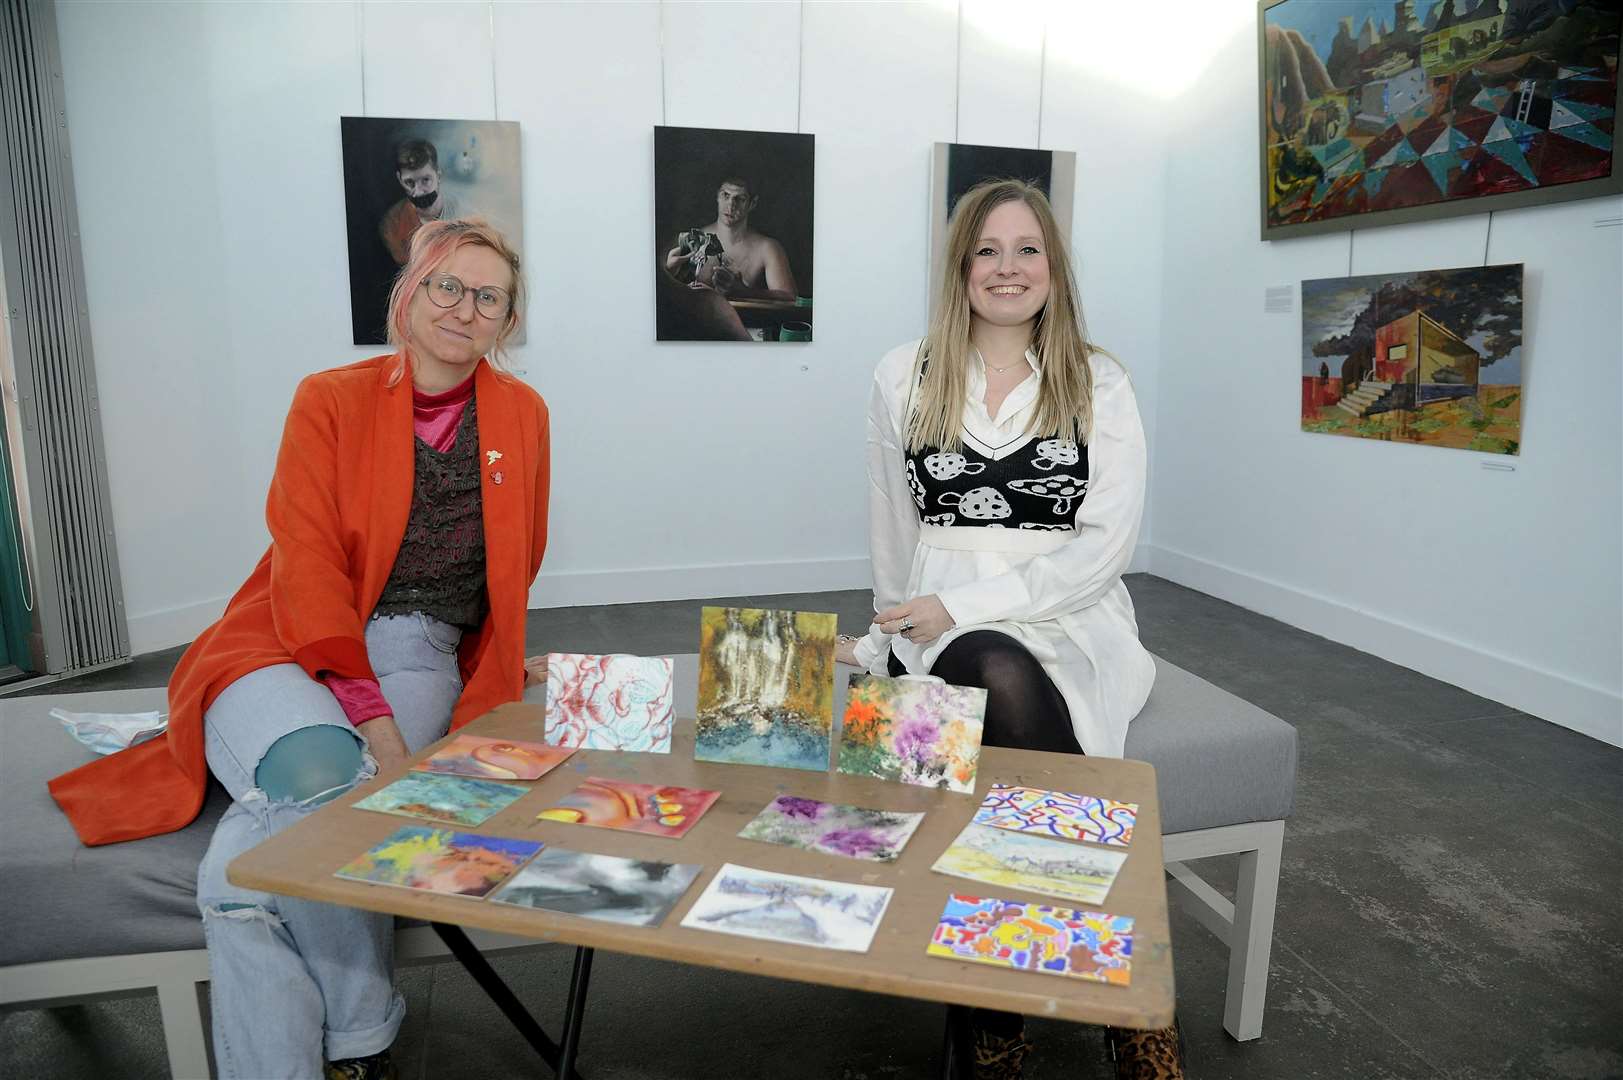 MAC board member Lucy Summers and artist Leah Davis with some of the colourful submissions that have been received so far.